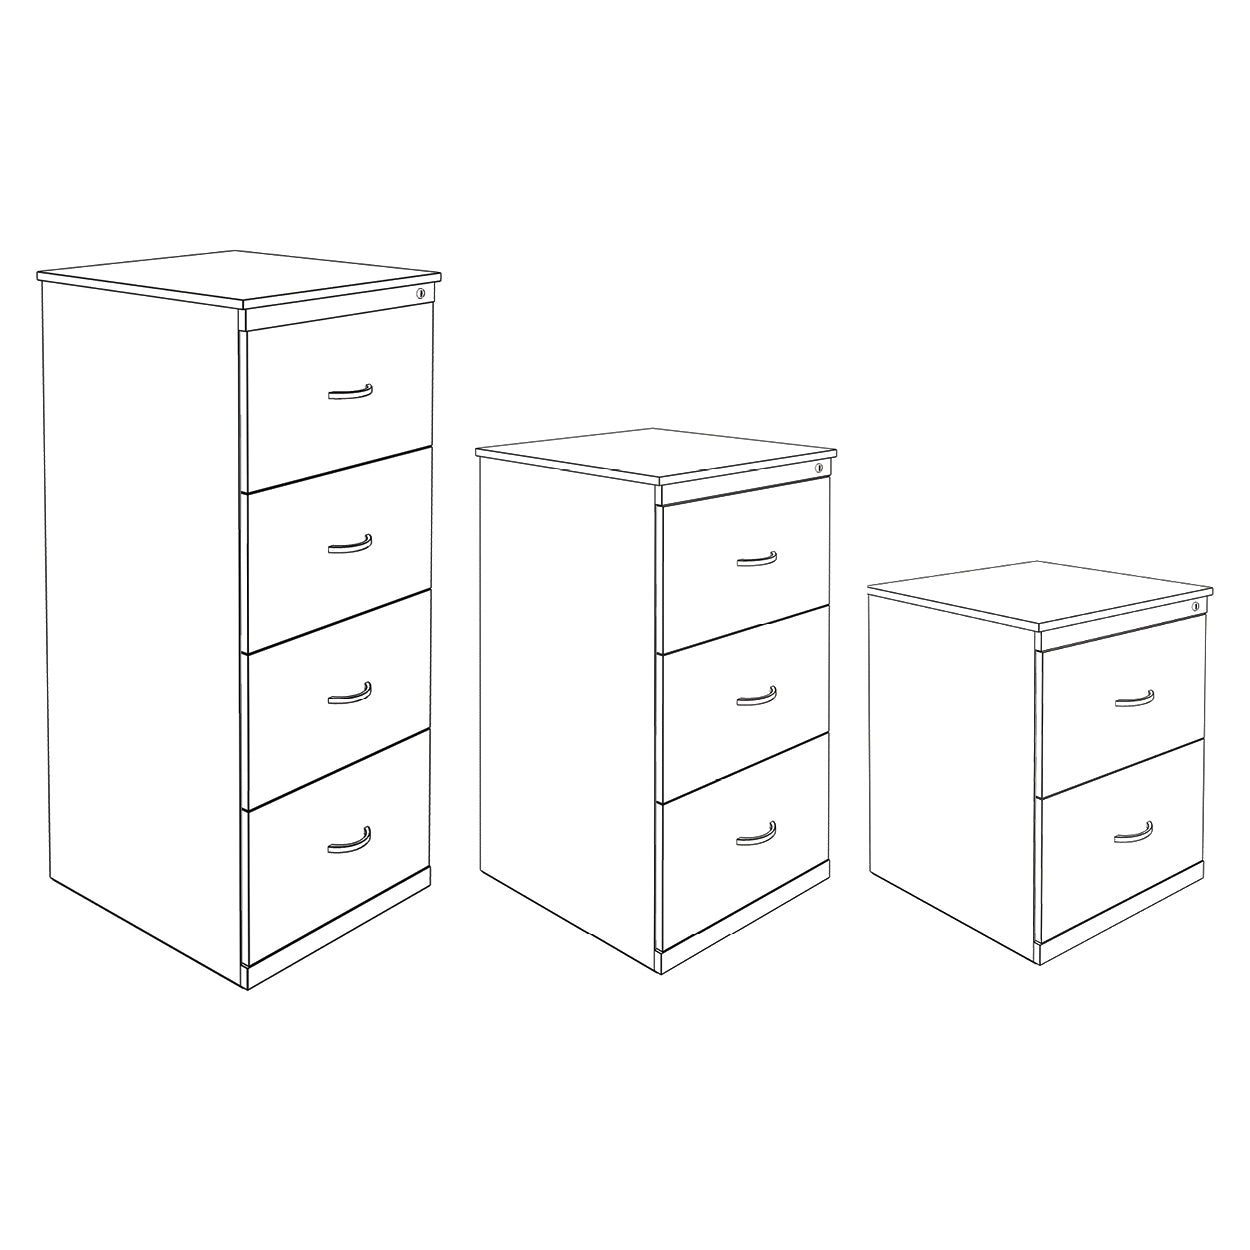 Hedcor filing drawers